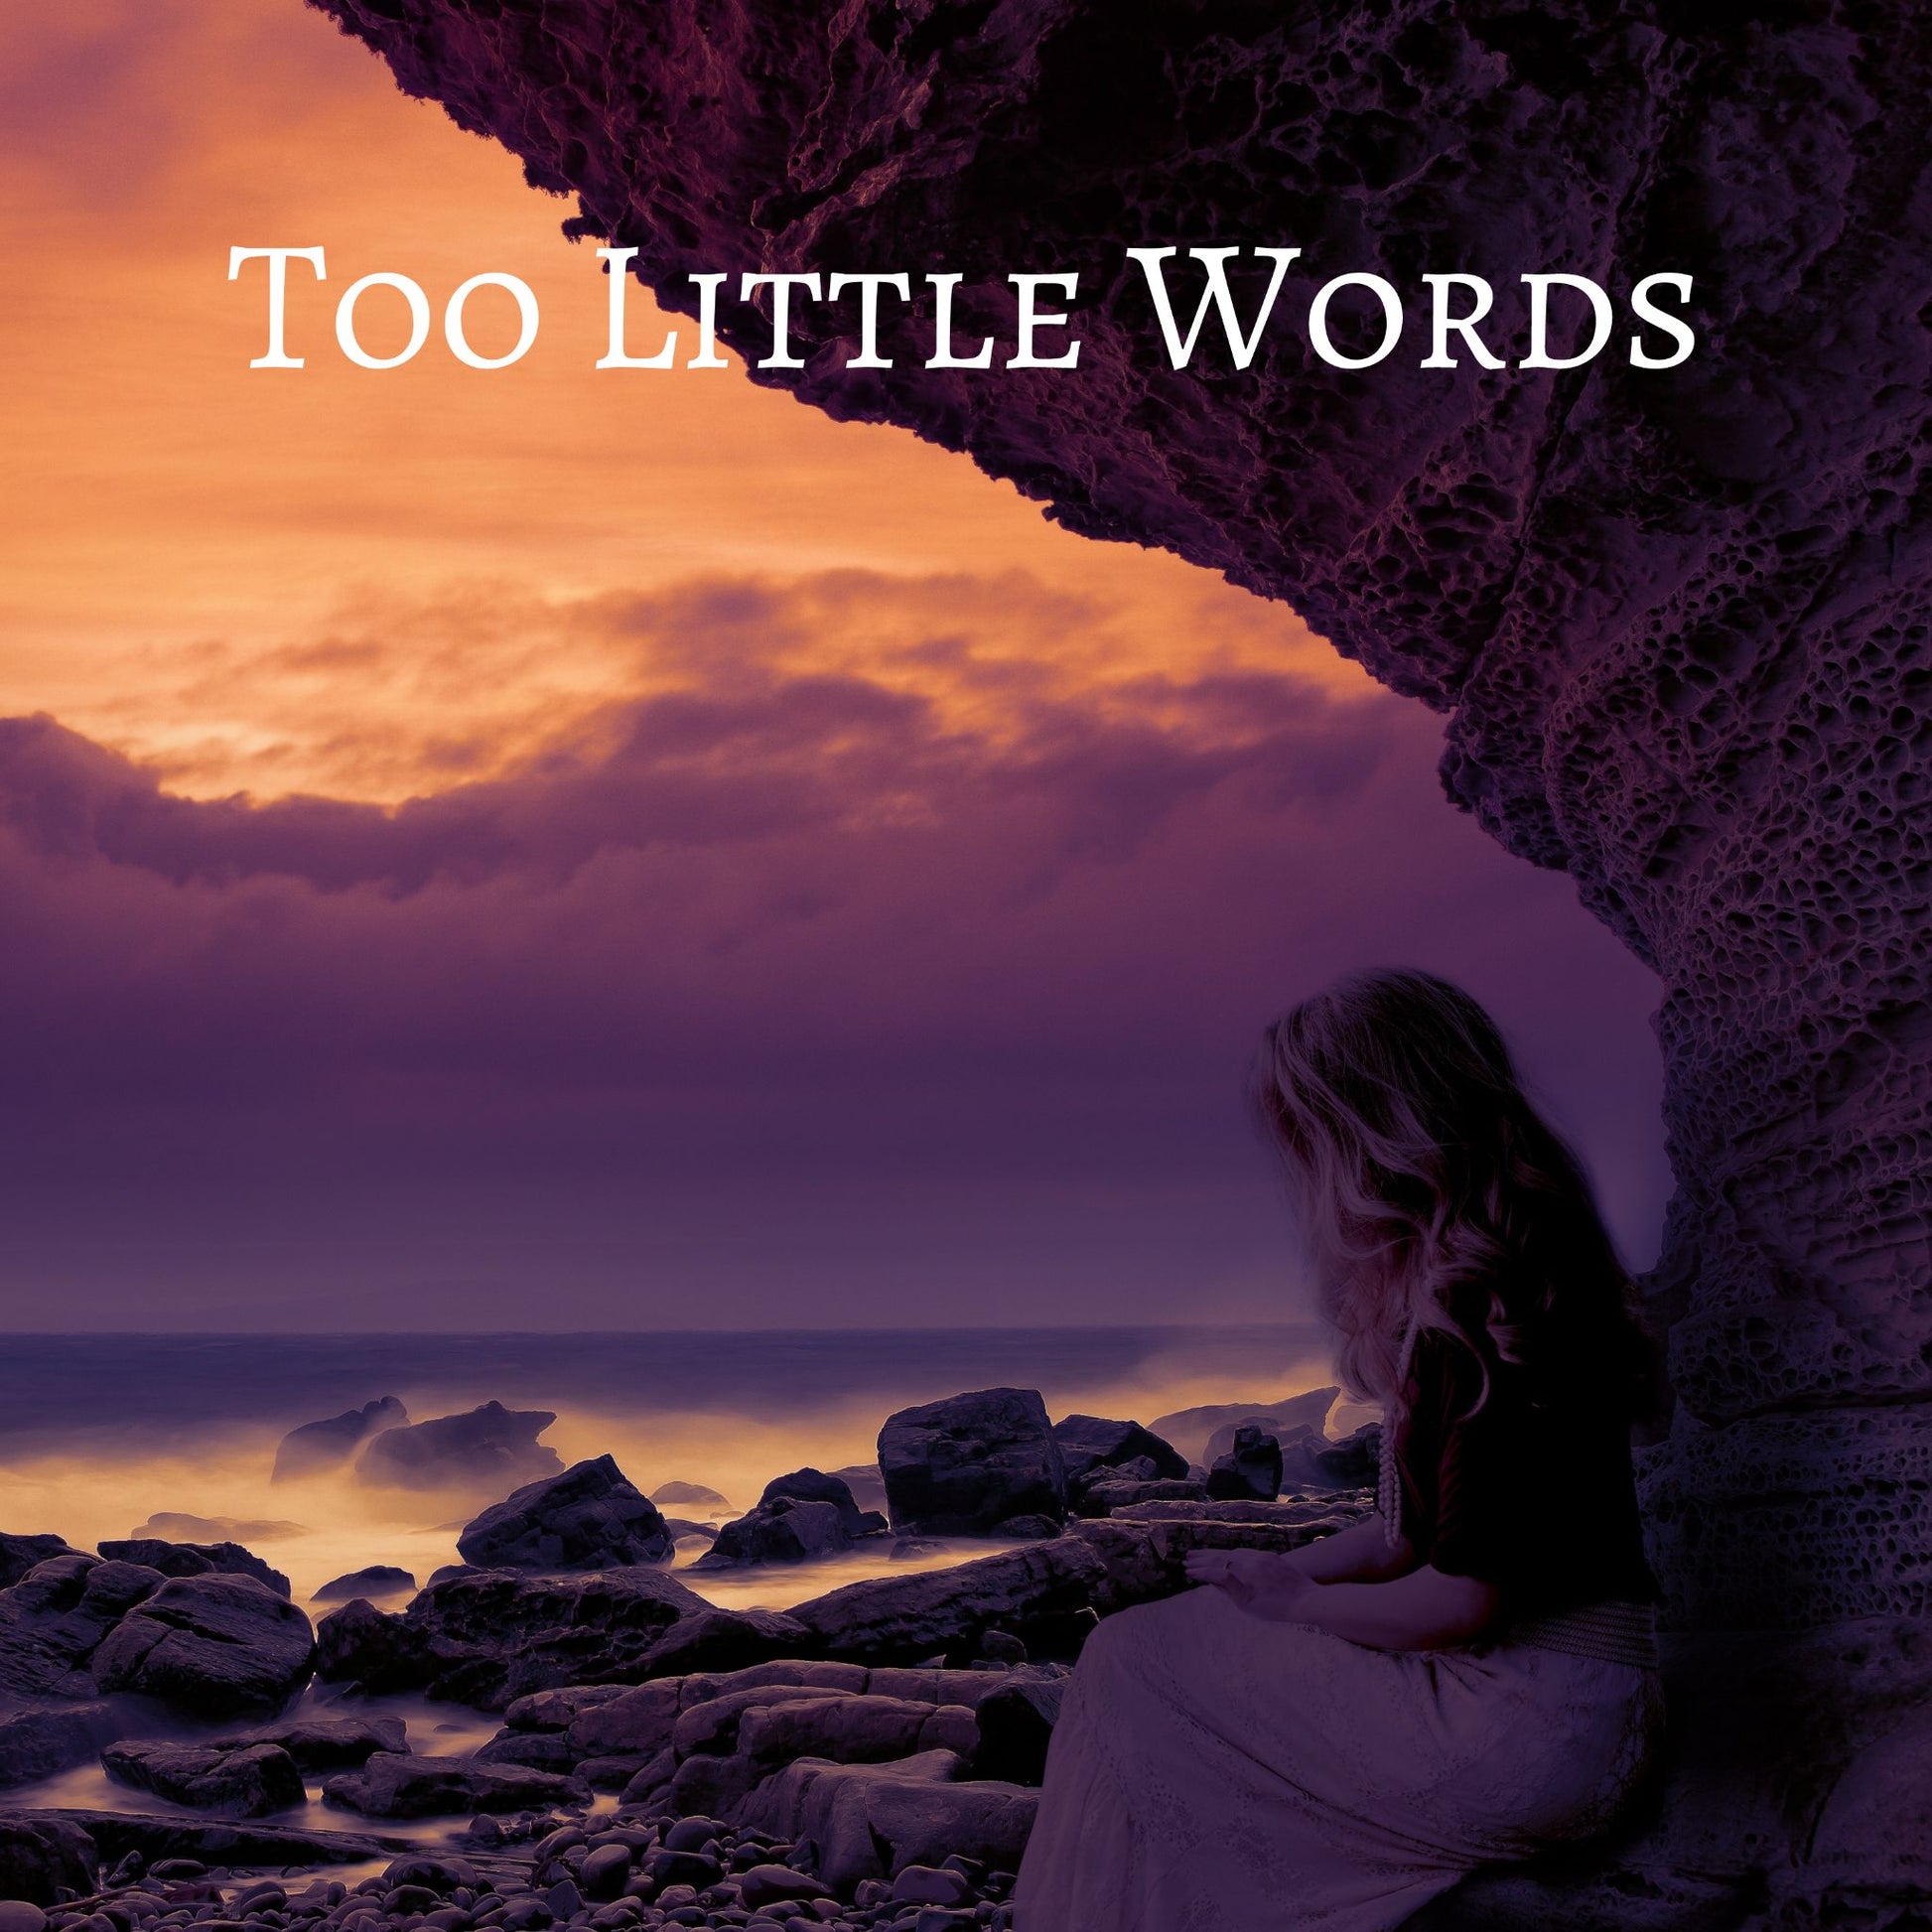 CD Cover of song Too Little Words